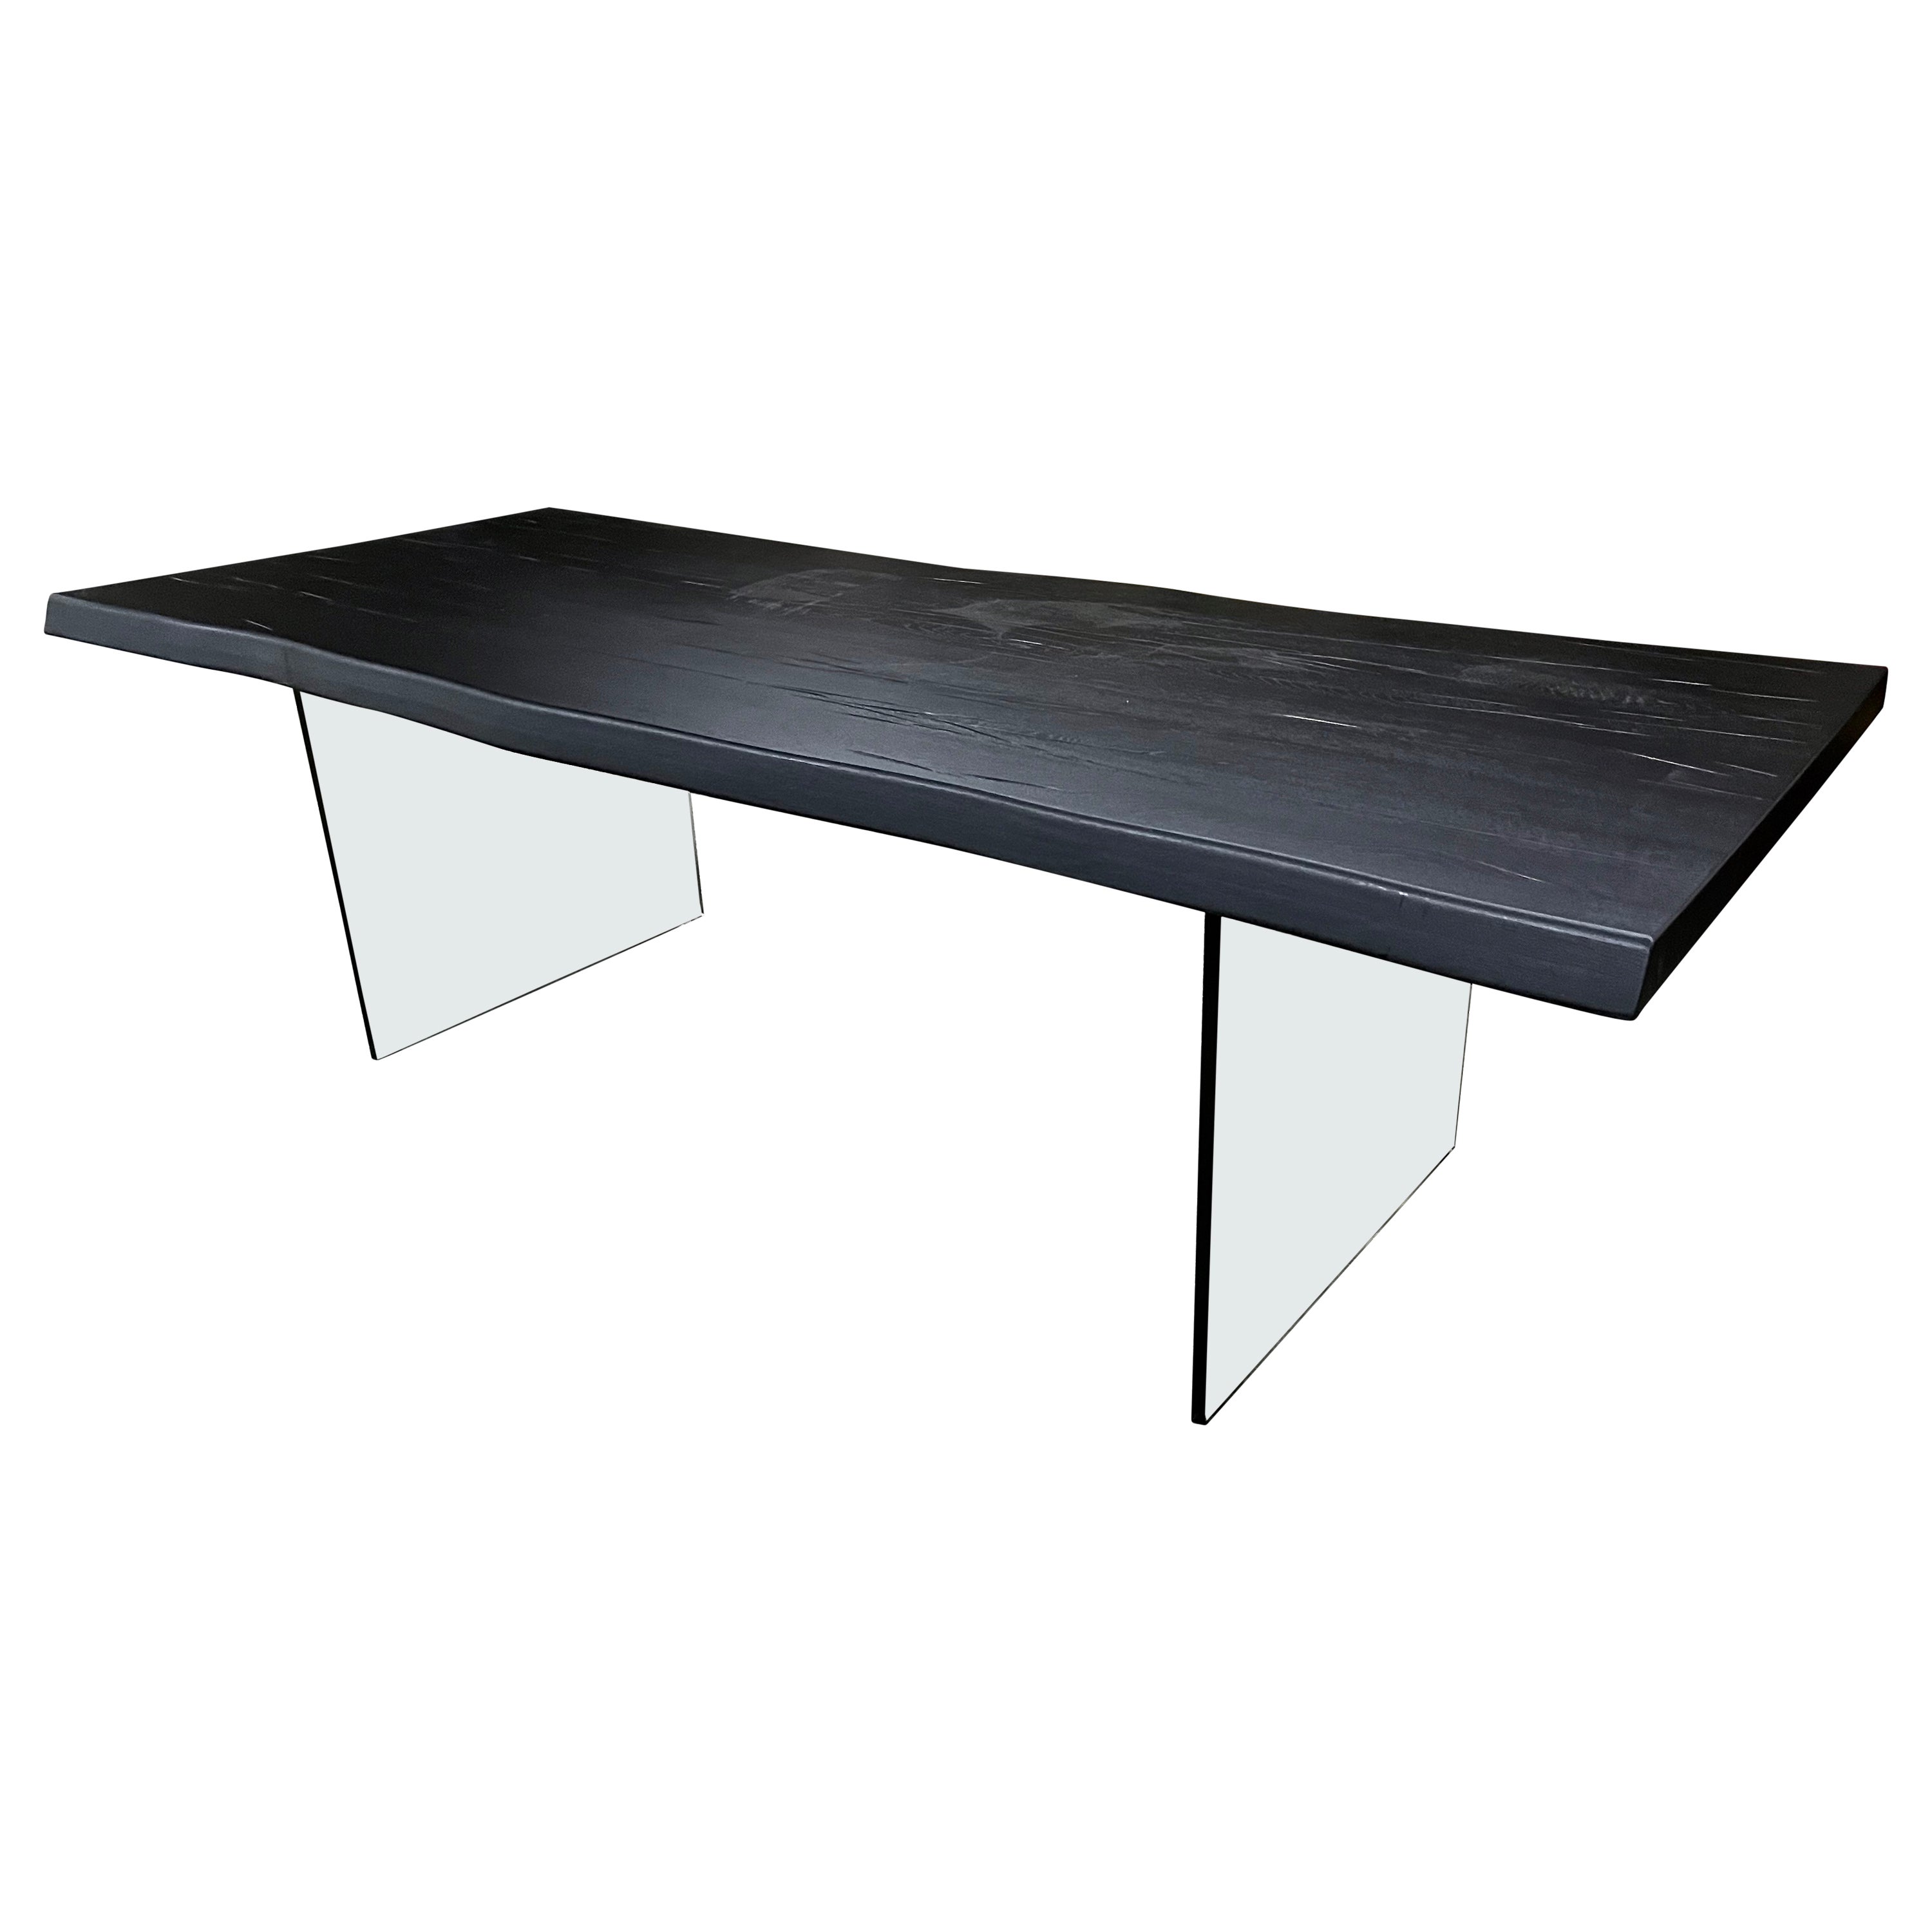 Contemporary Black Oakwood Live Edge Dining Table With Glass Feet, Austria 2022 For Sale